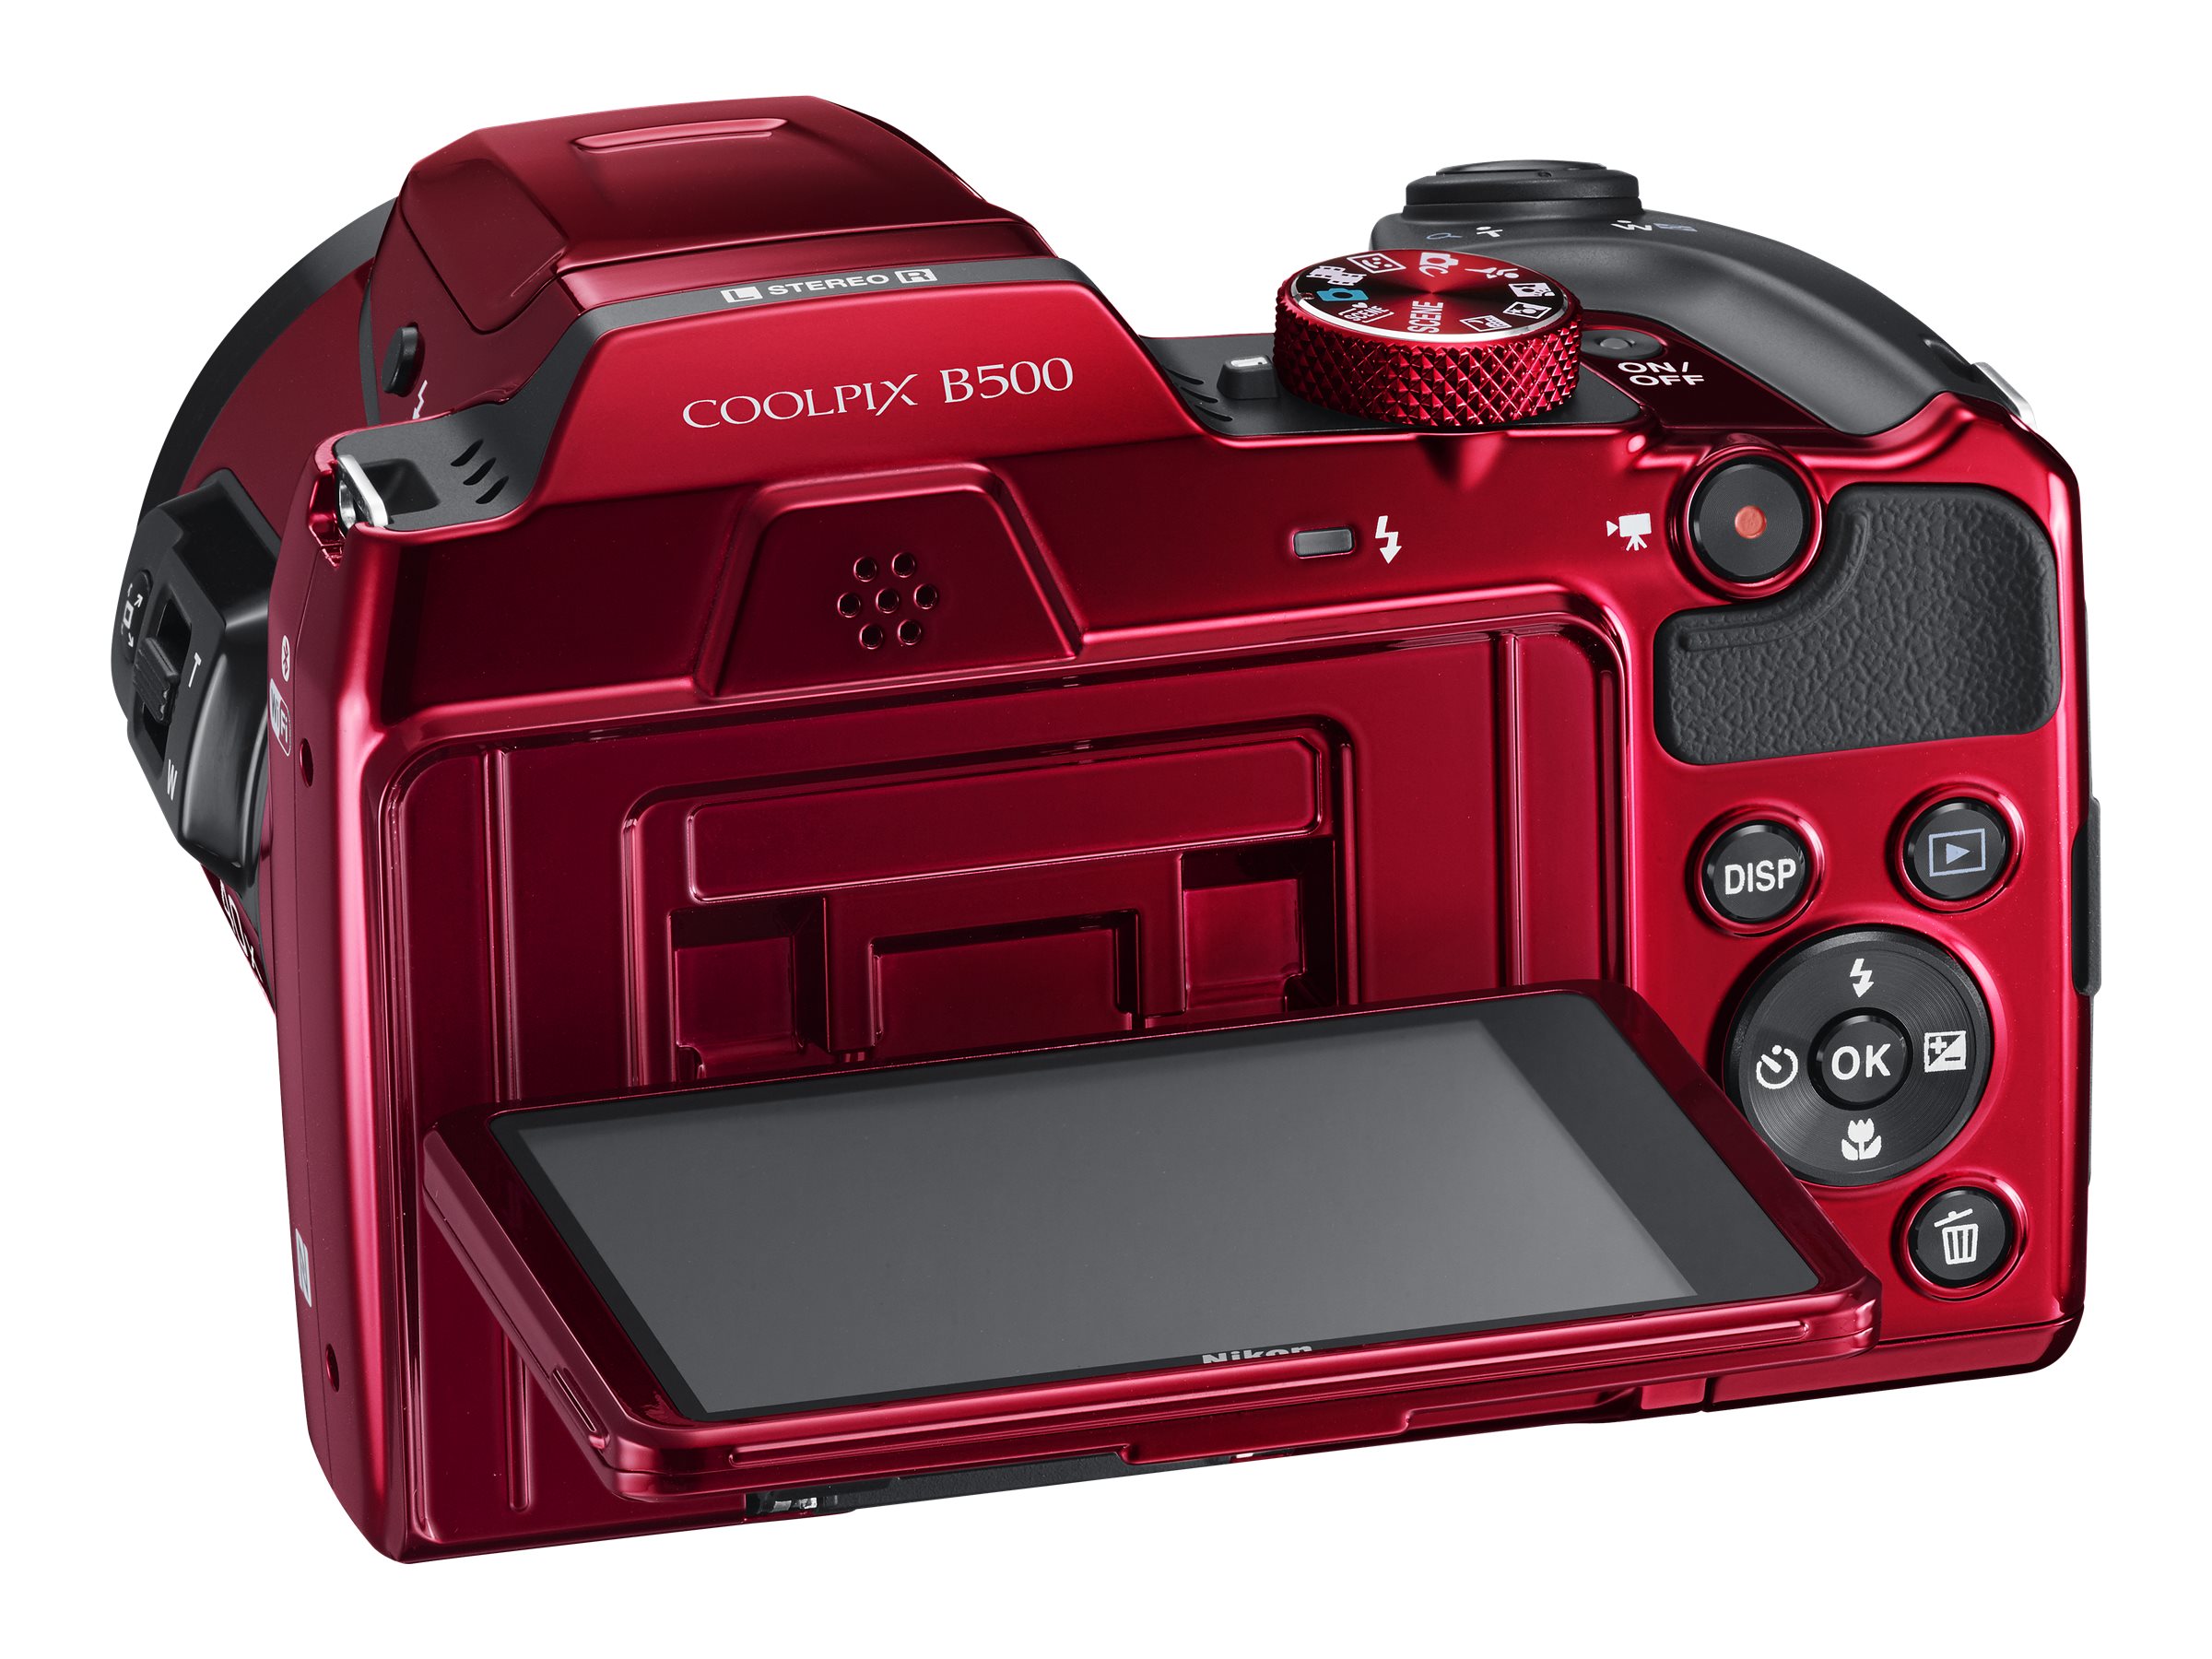 Nikon Red COOLPIX B500 Digital Camera with 16 Megapixels and 40x Optical Zoom - image 11 of 11